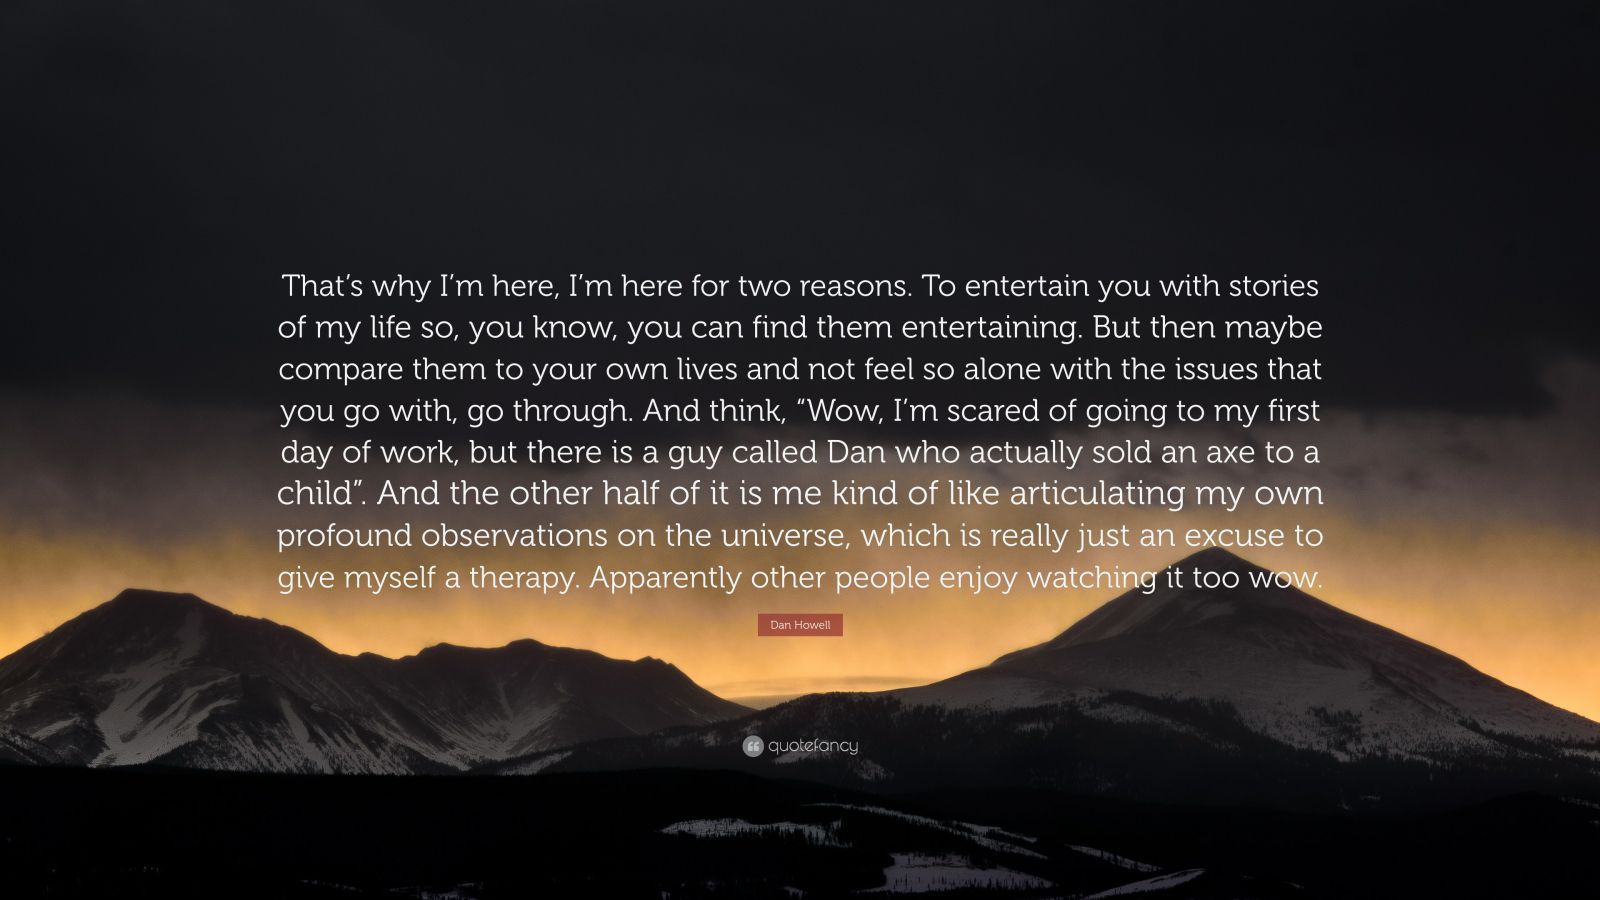 Dan Howell Quote: “That’s why I’m here, I’m here for two reasons. To